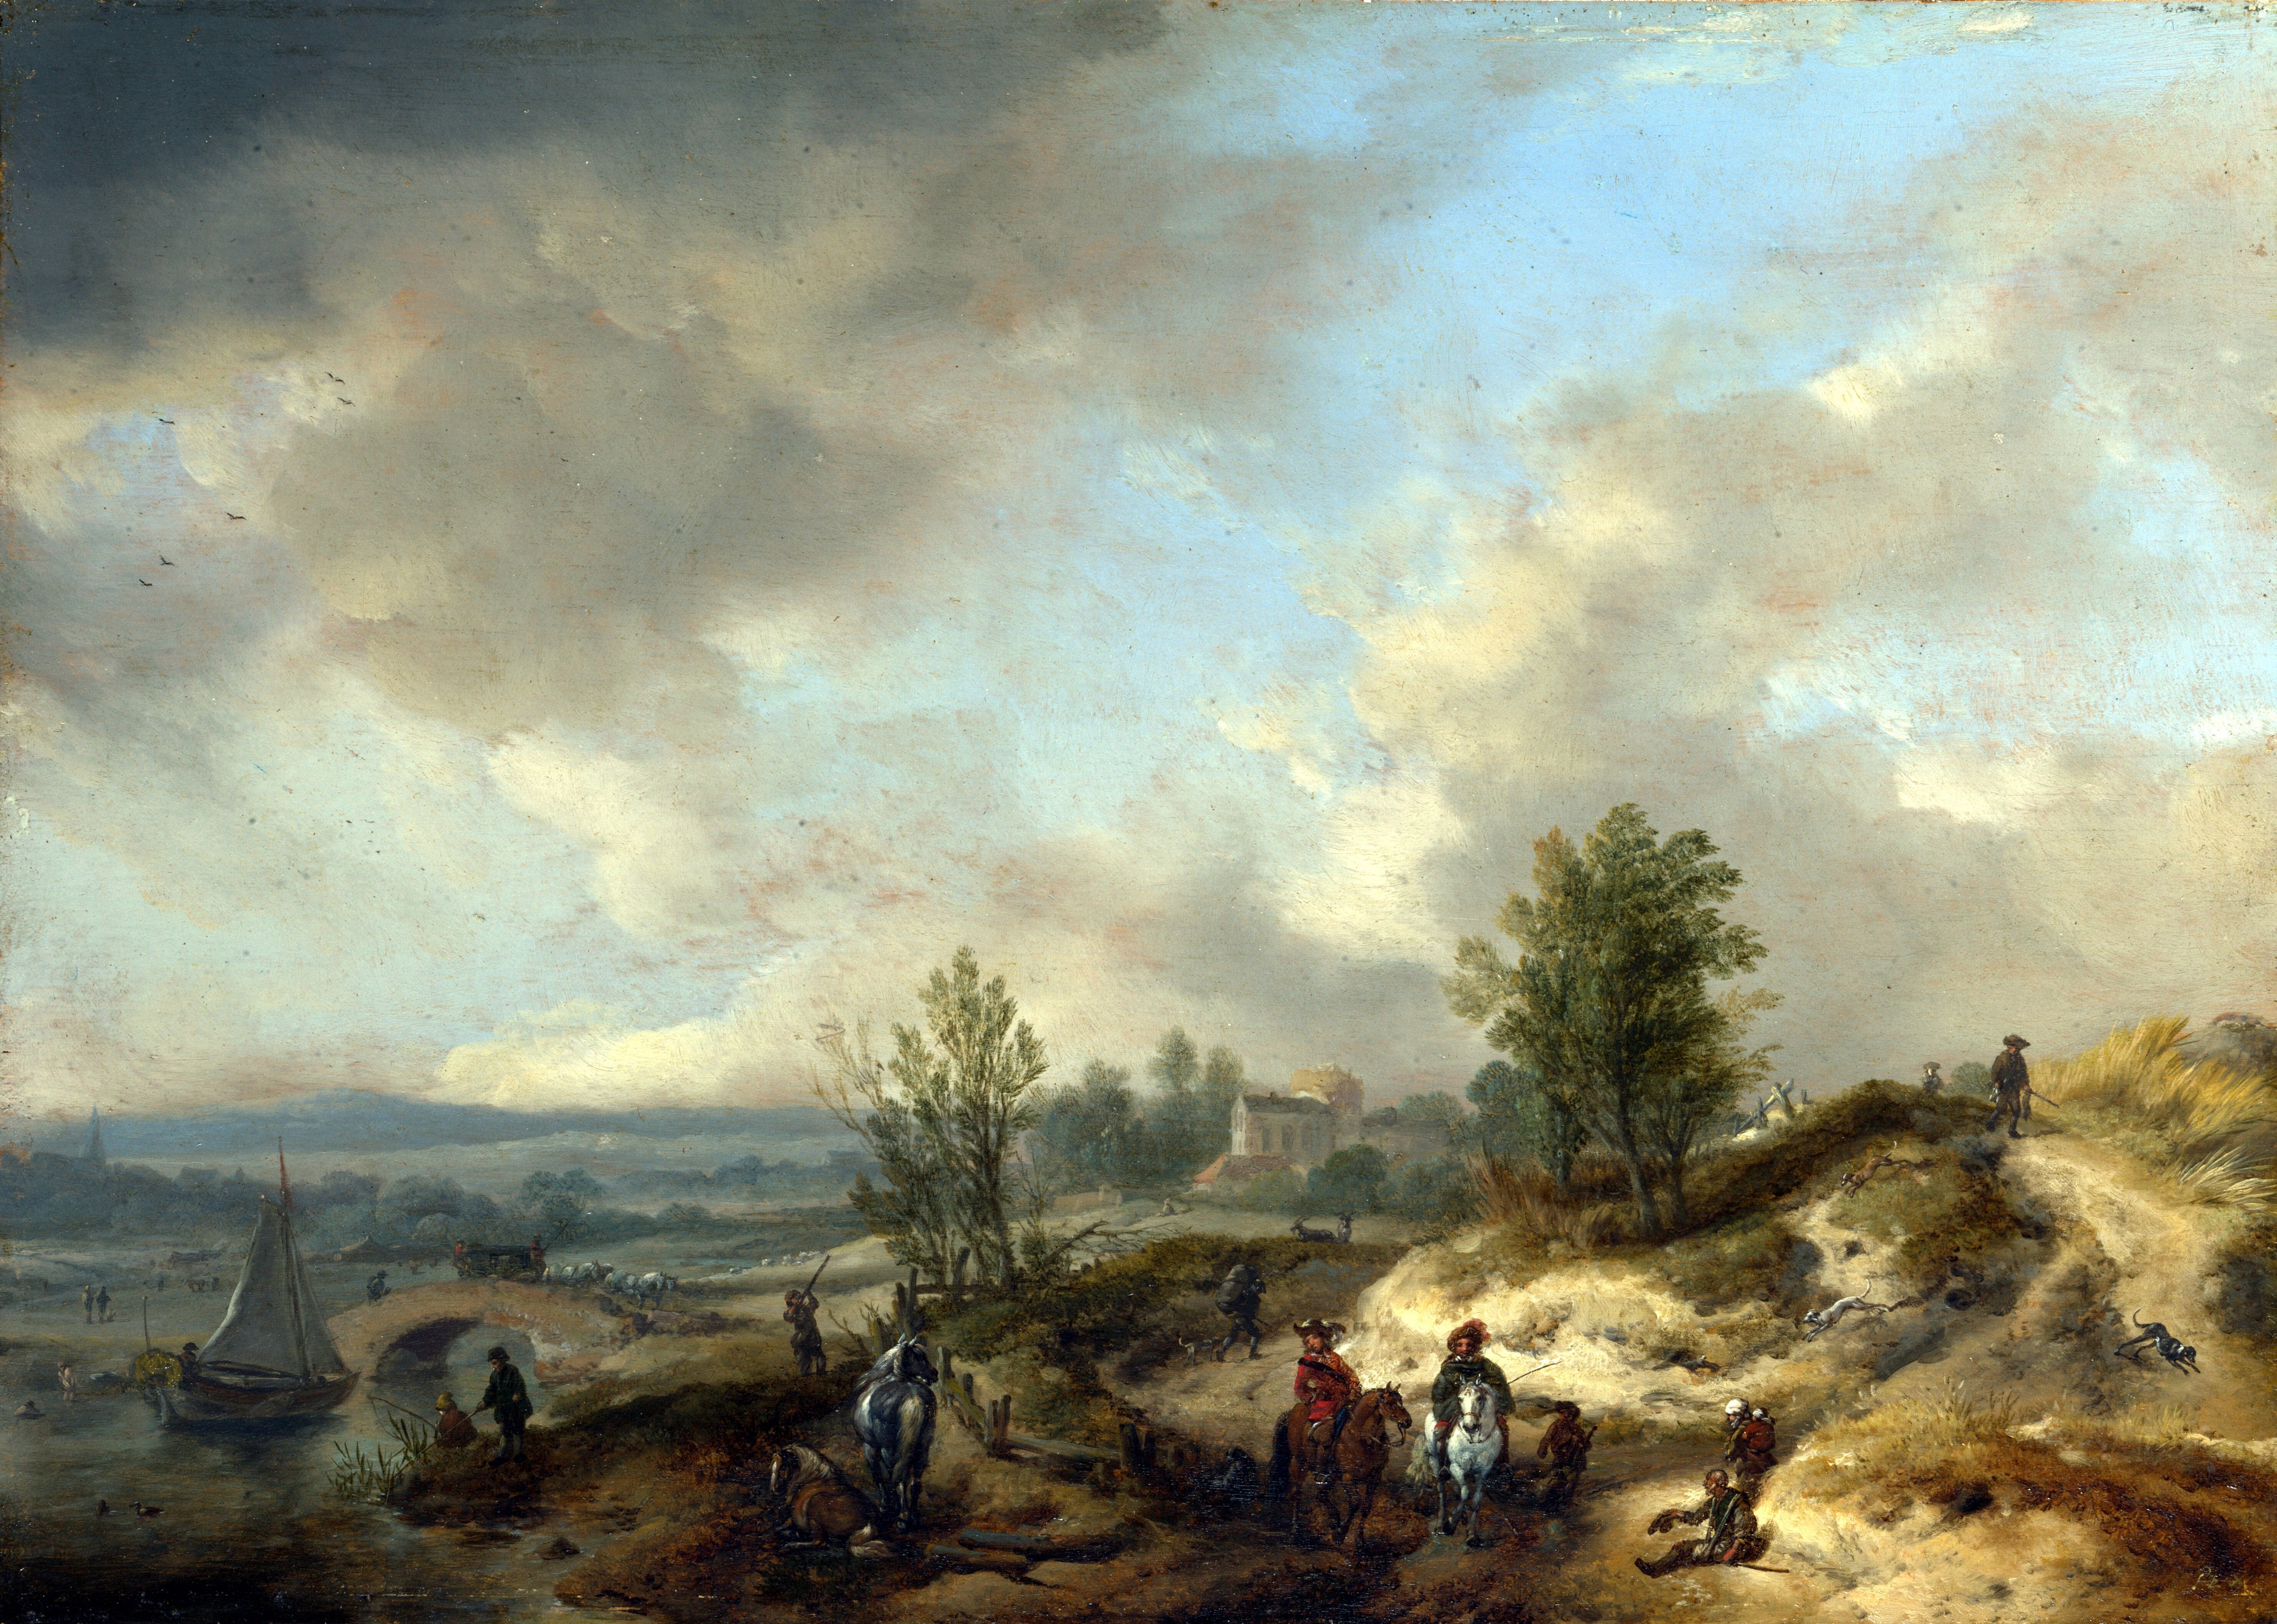 Philips Wouwerman - A Dune Landscape with a River and Many Figures (1660s)